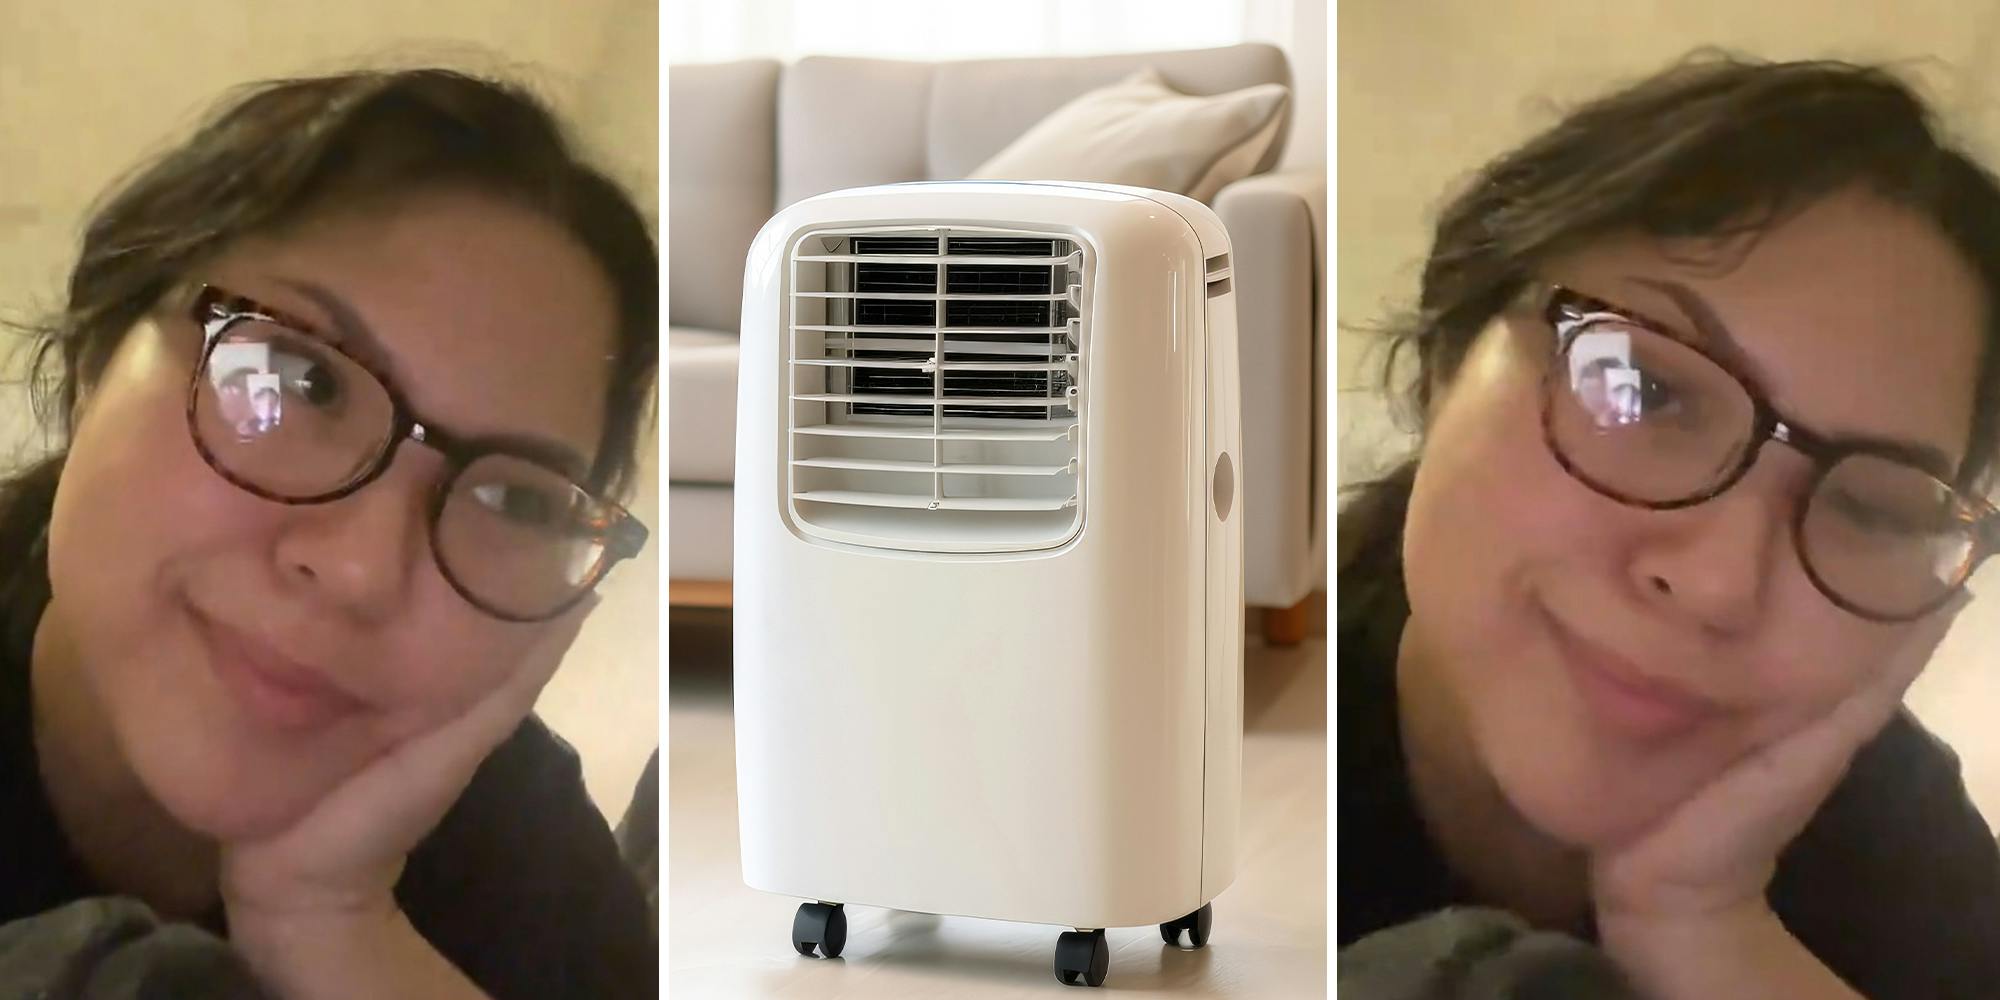 ‘We are being charged $400 a month’: Renter uses portable AC unit hack to circumvent high electricity bill this summer